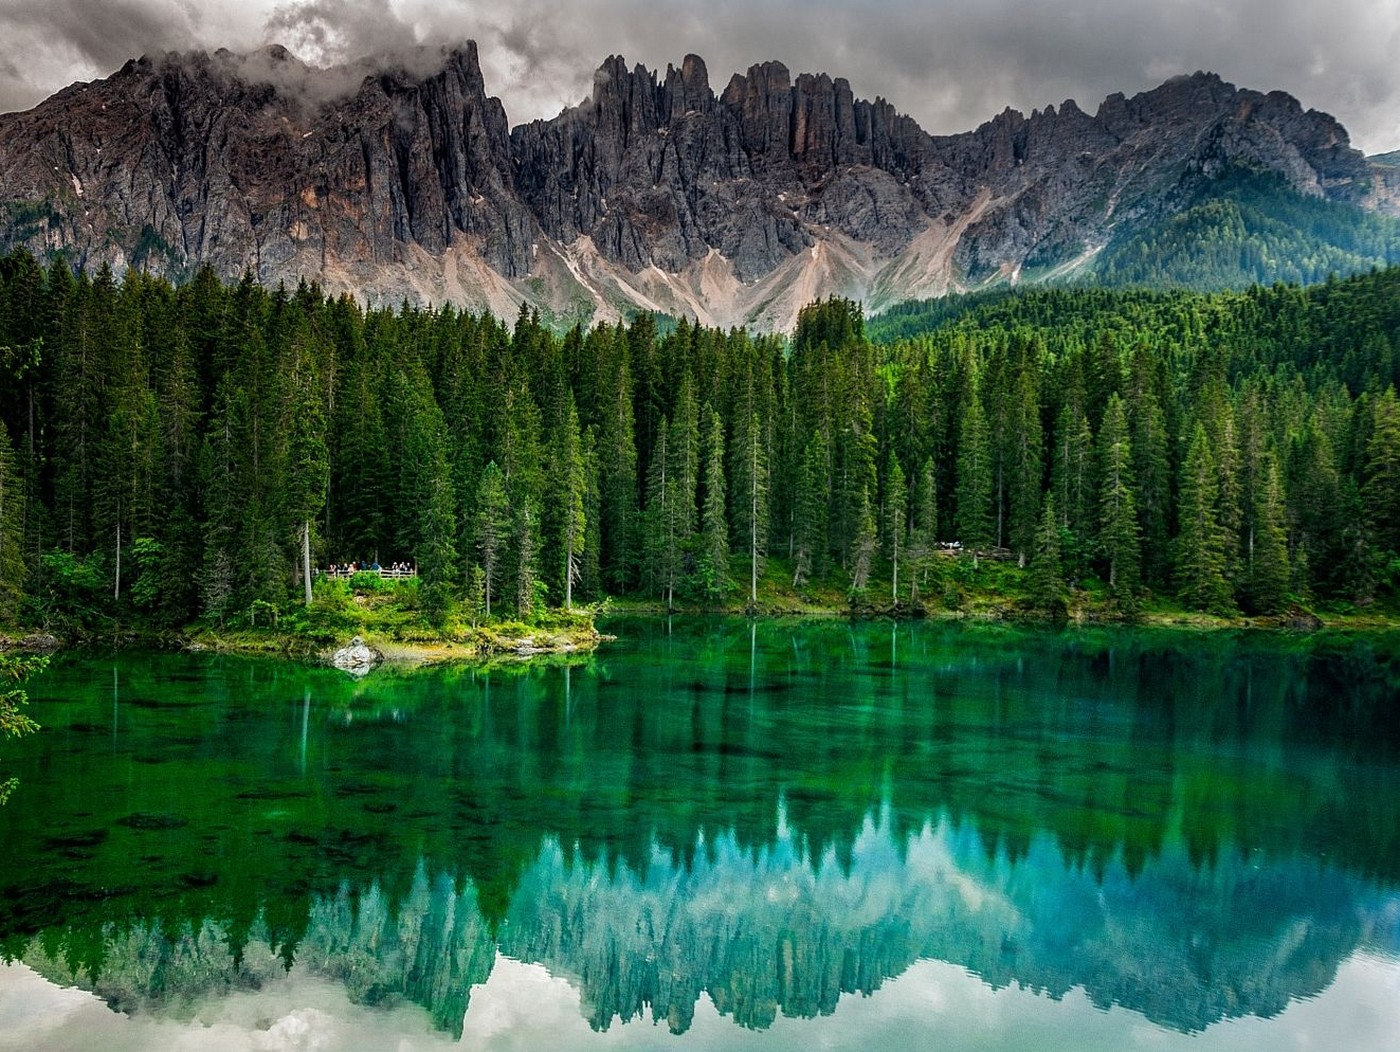 General 1400x1052 nature landscape photography lake calm waters reflection forest mountains trees emerald green summer Alps Italy Karersee